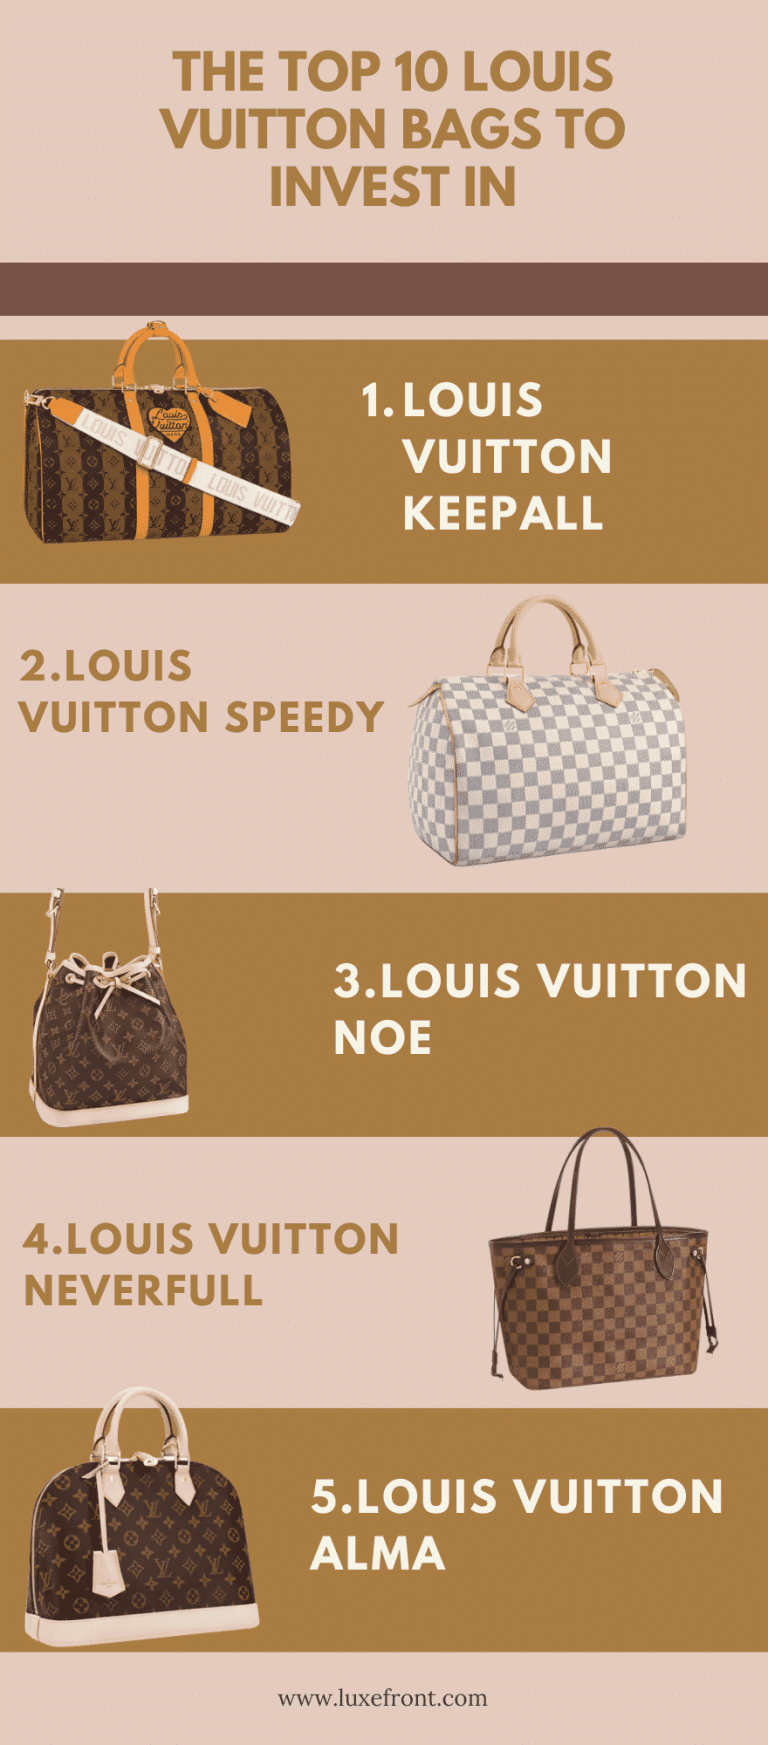 The Best Louis Vuitton Bags To Invest in 2022 - Luxe Front